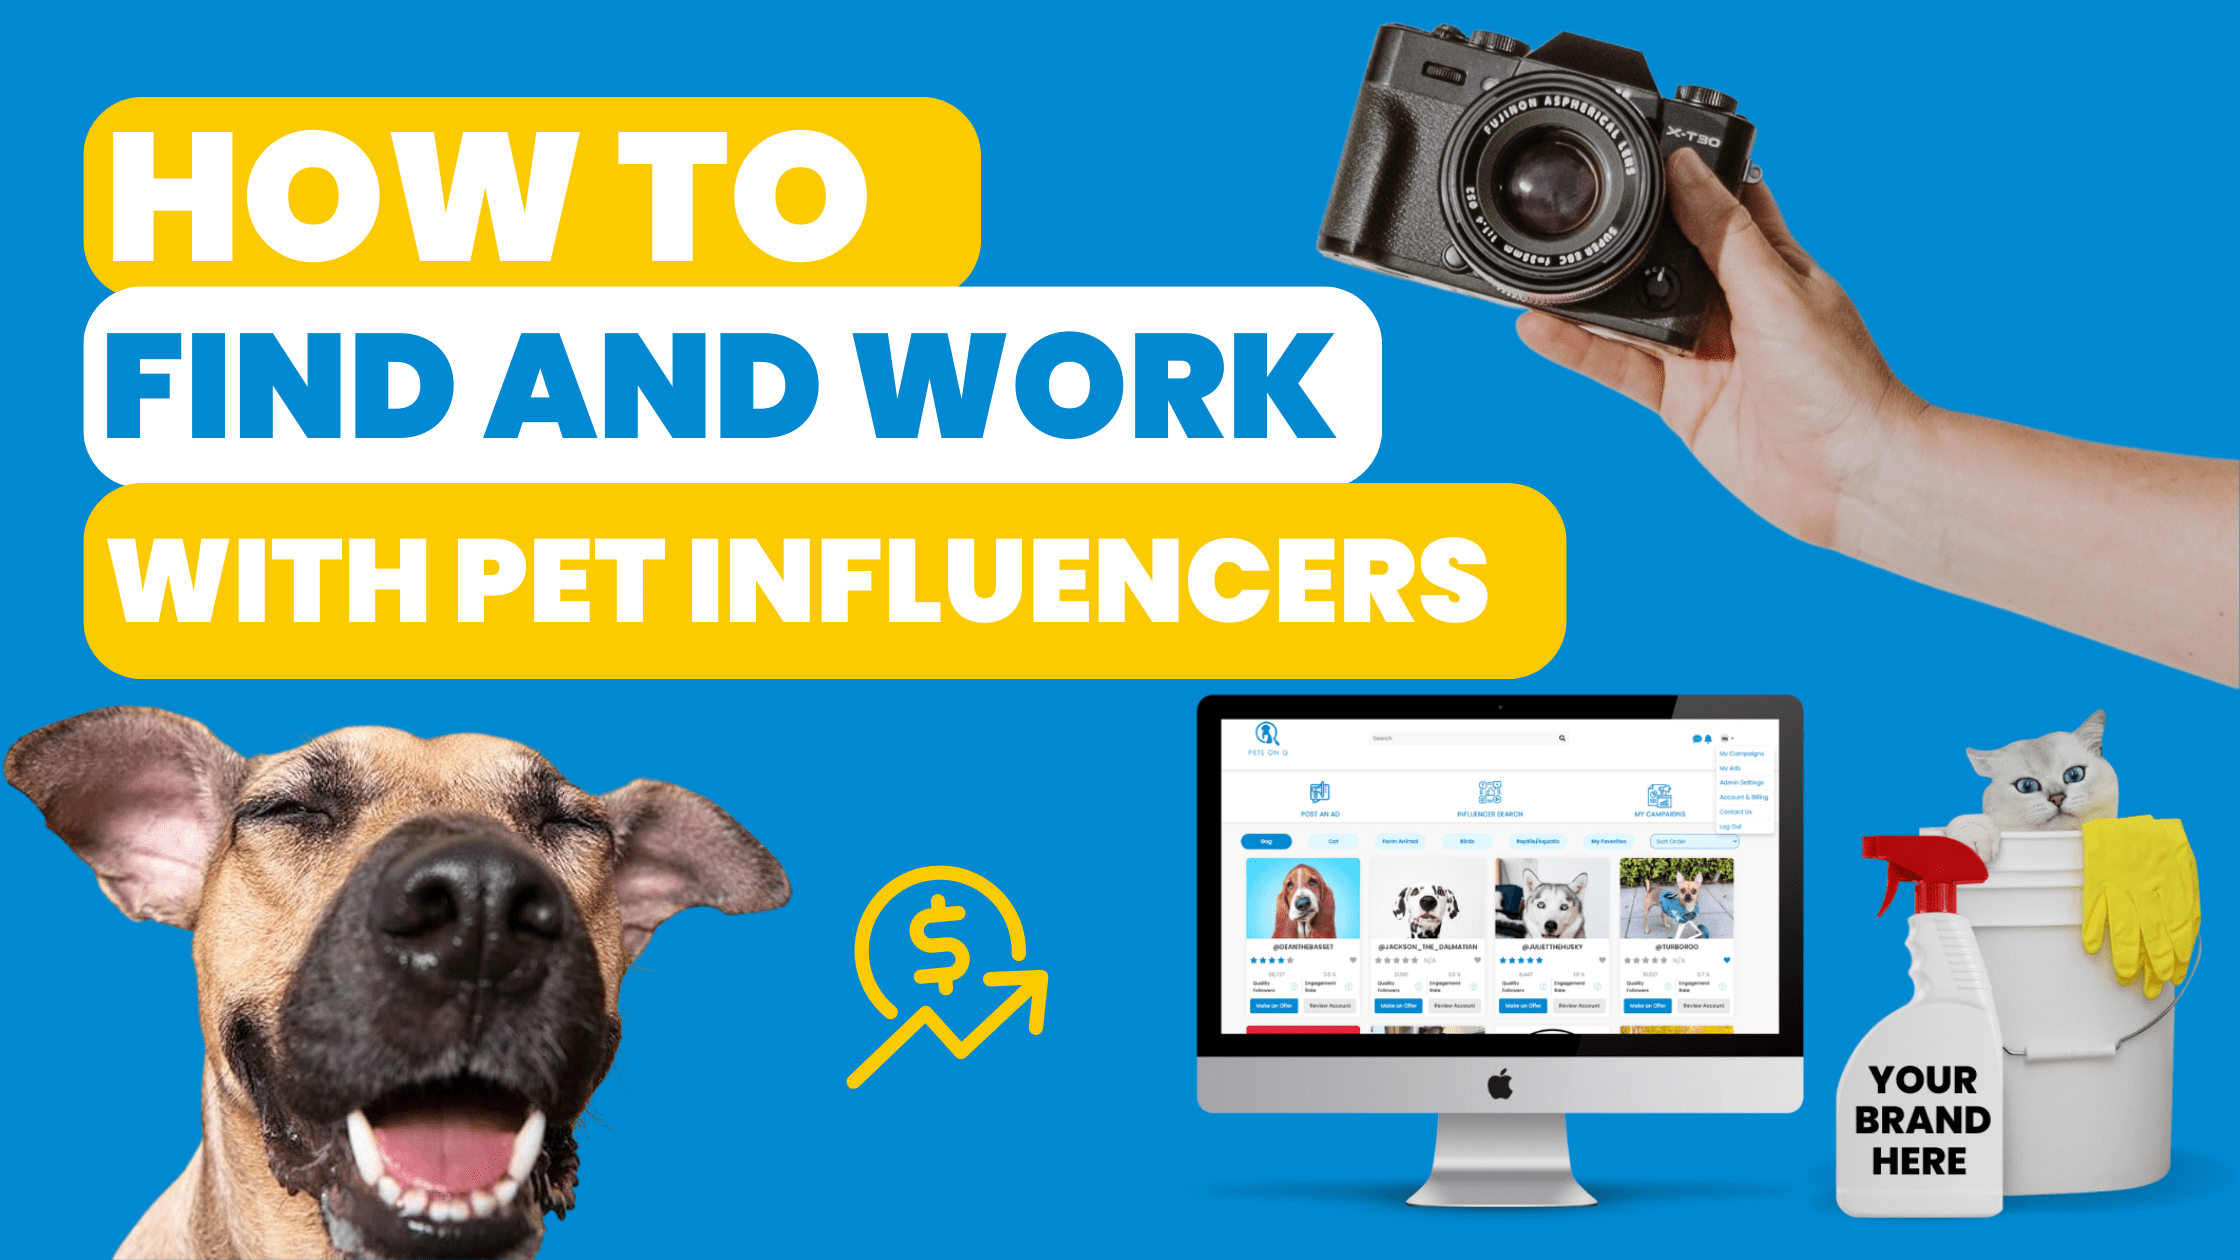 Find & Work With Pet Influencers